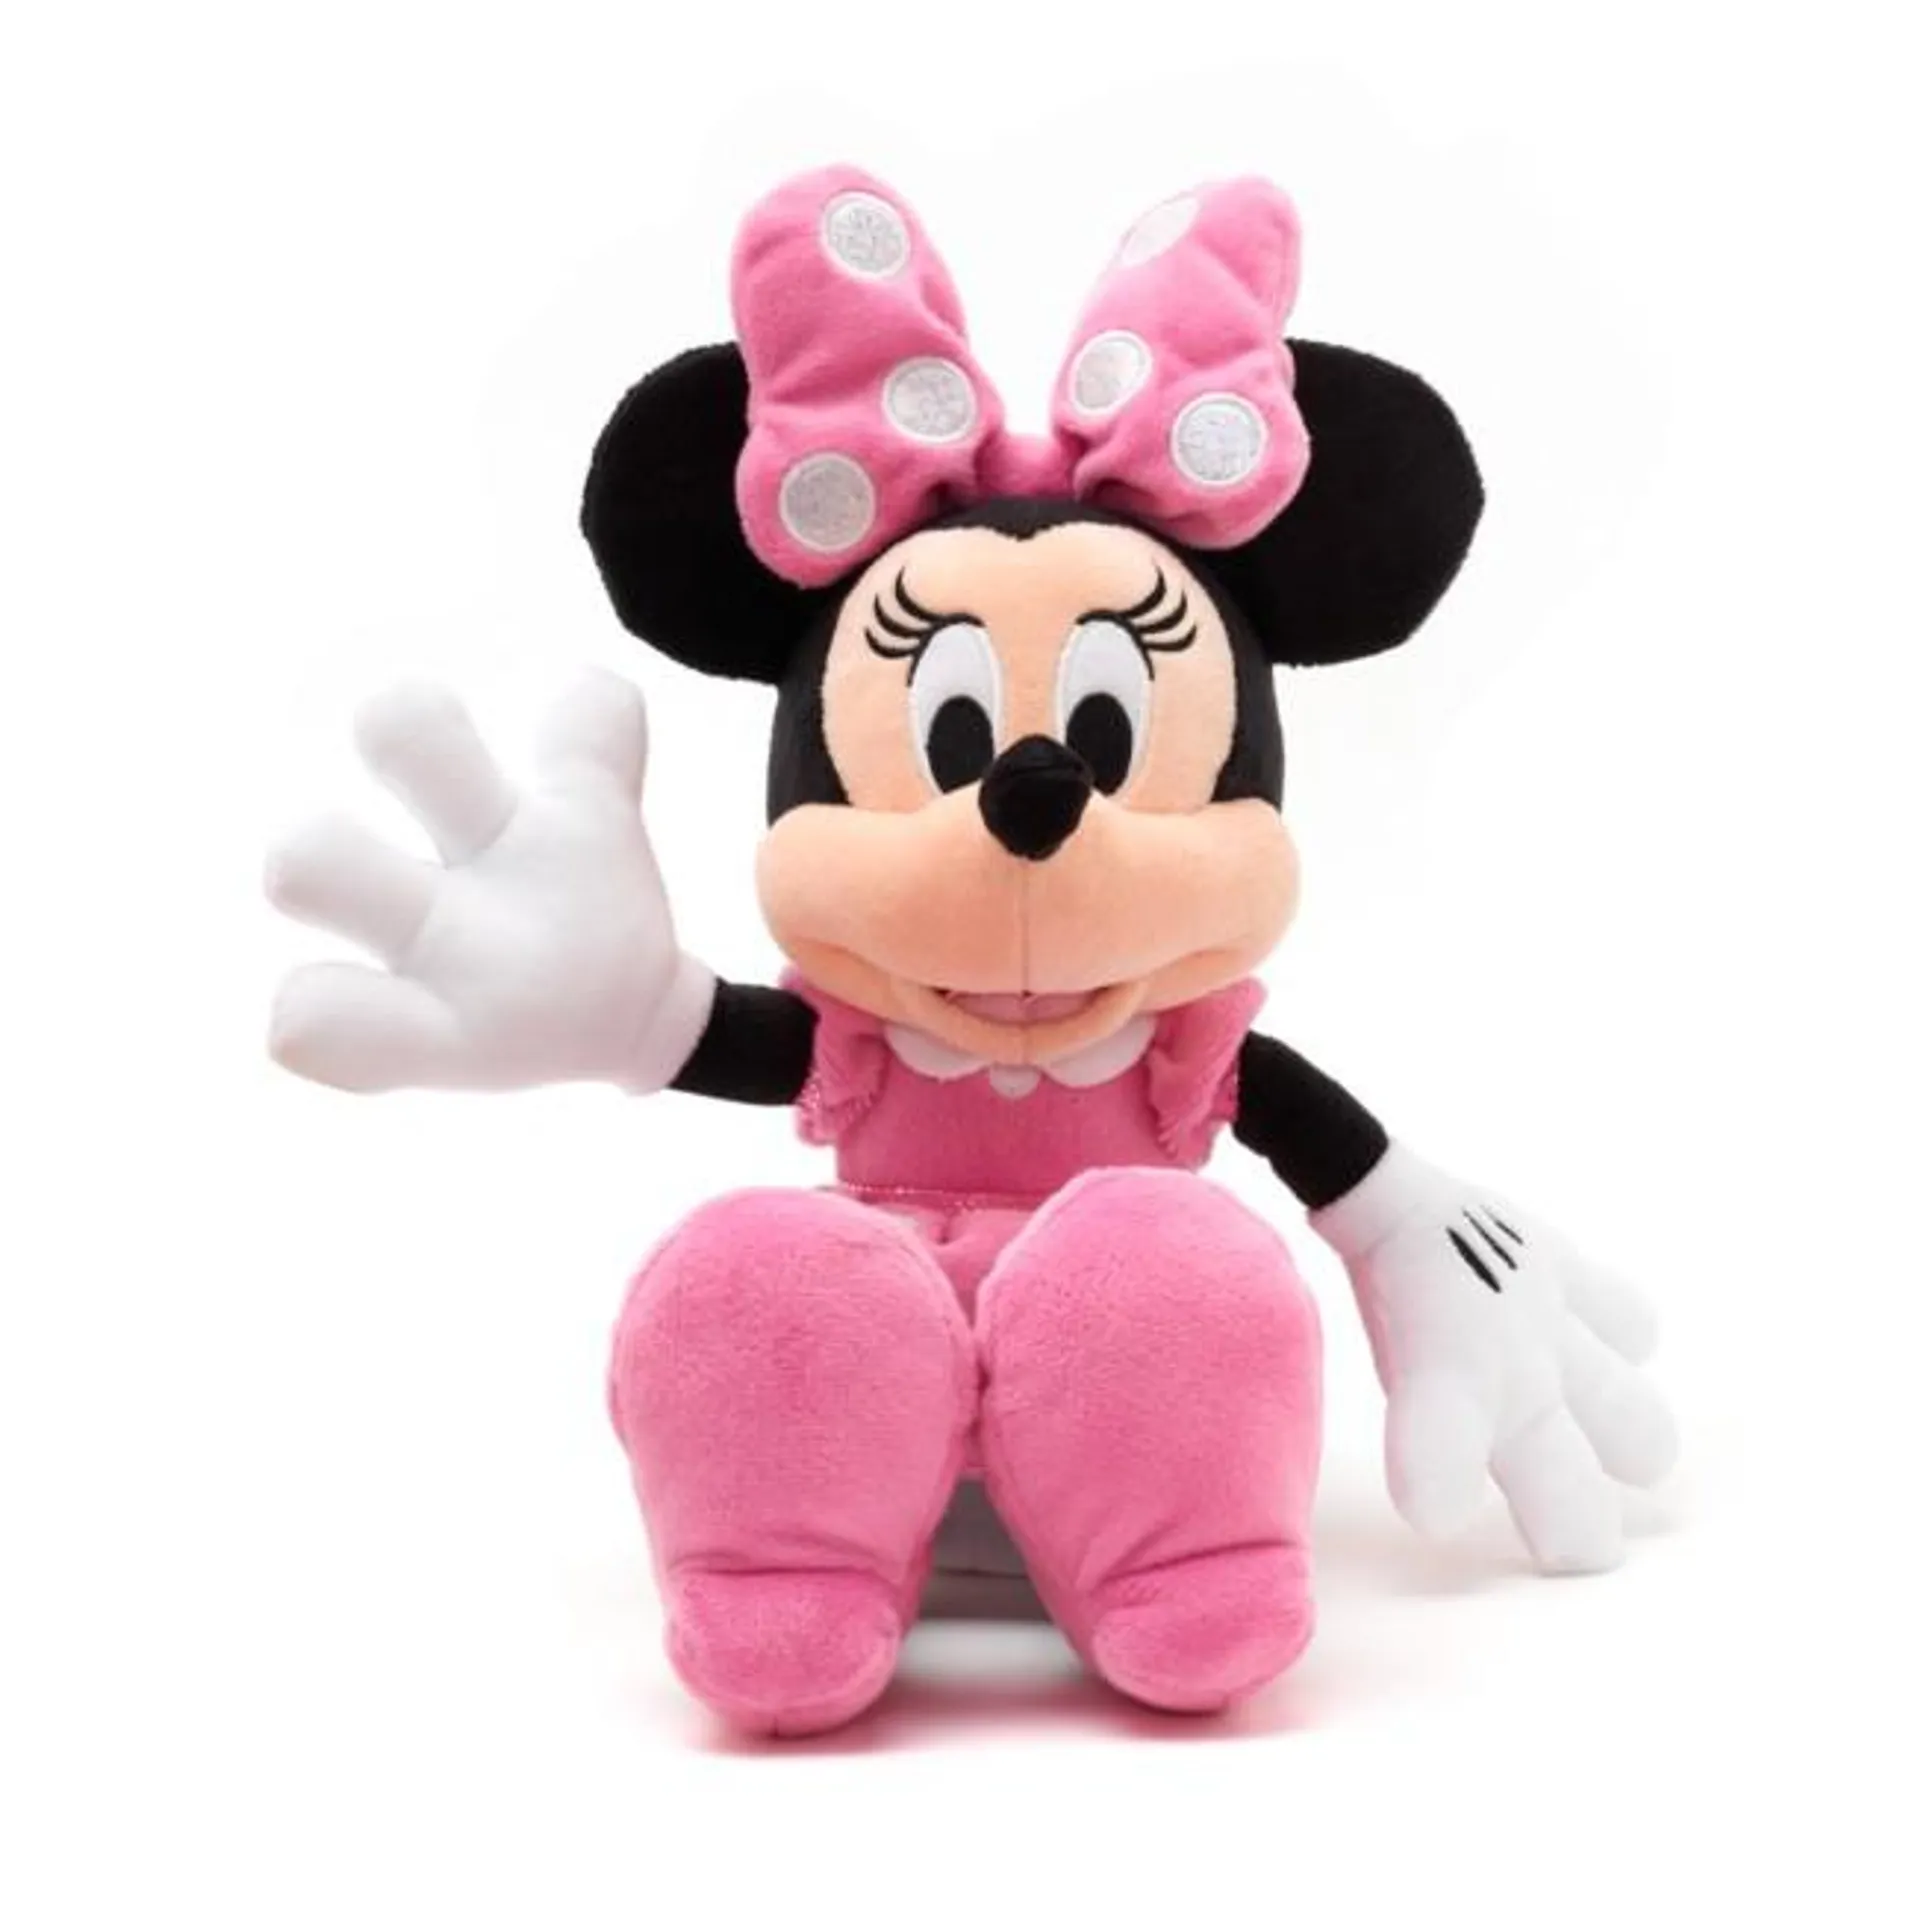 Disney Store Minnie Mouse Small Pink Soft Toy